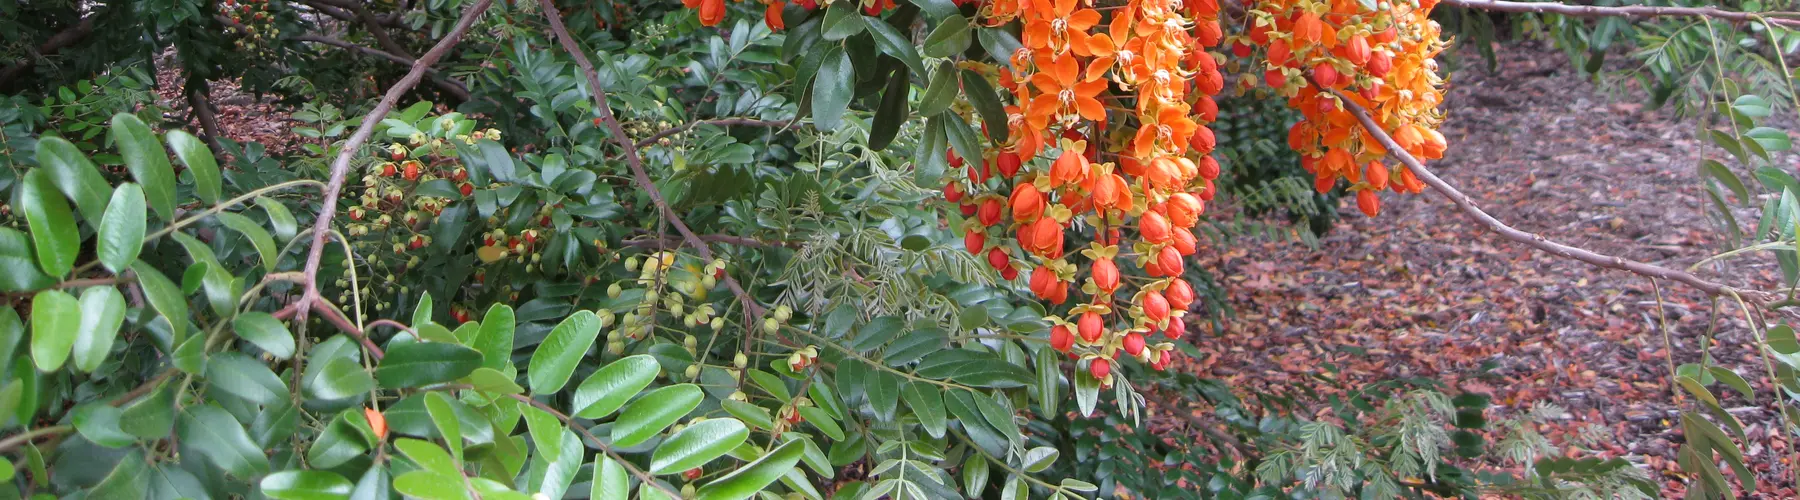 Orange and yellow flowers, plus red-orange fruits, drape towards the ground like pom-poms amidst stalks of green leaves. 